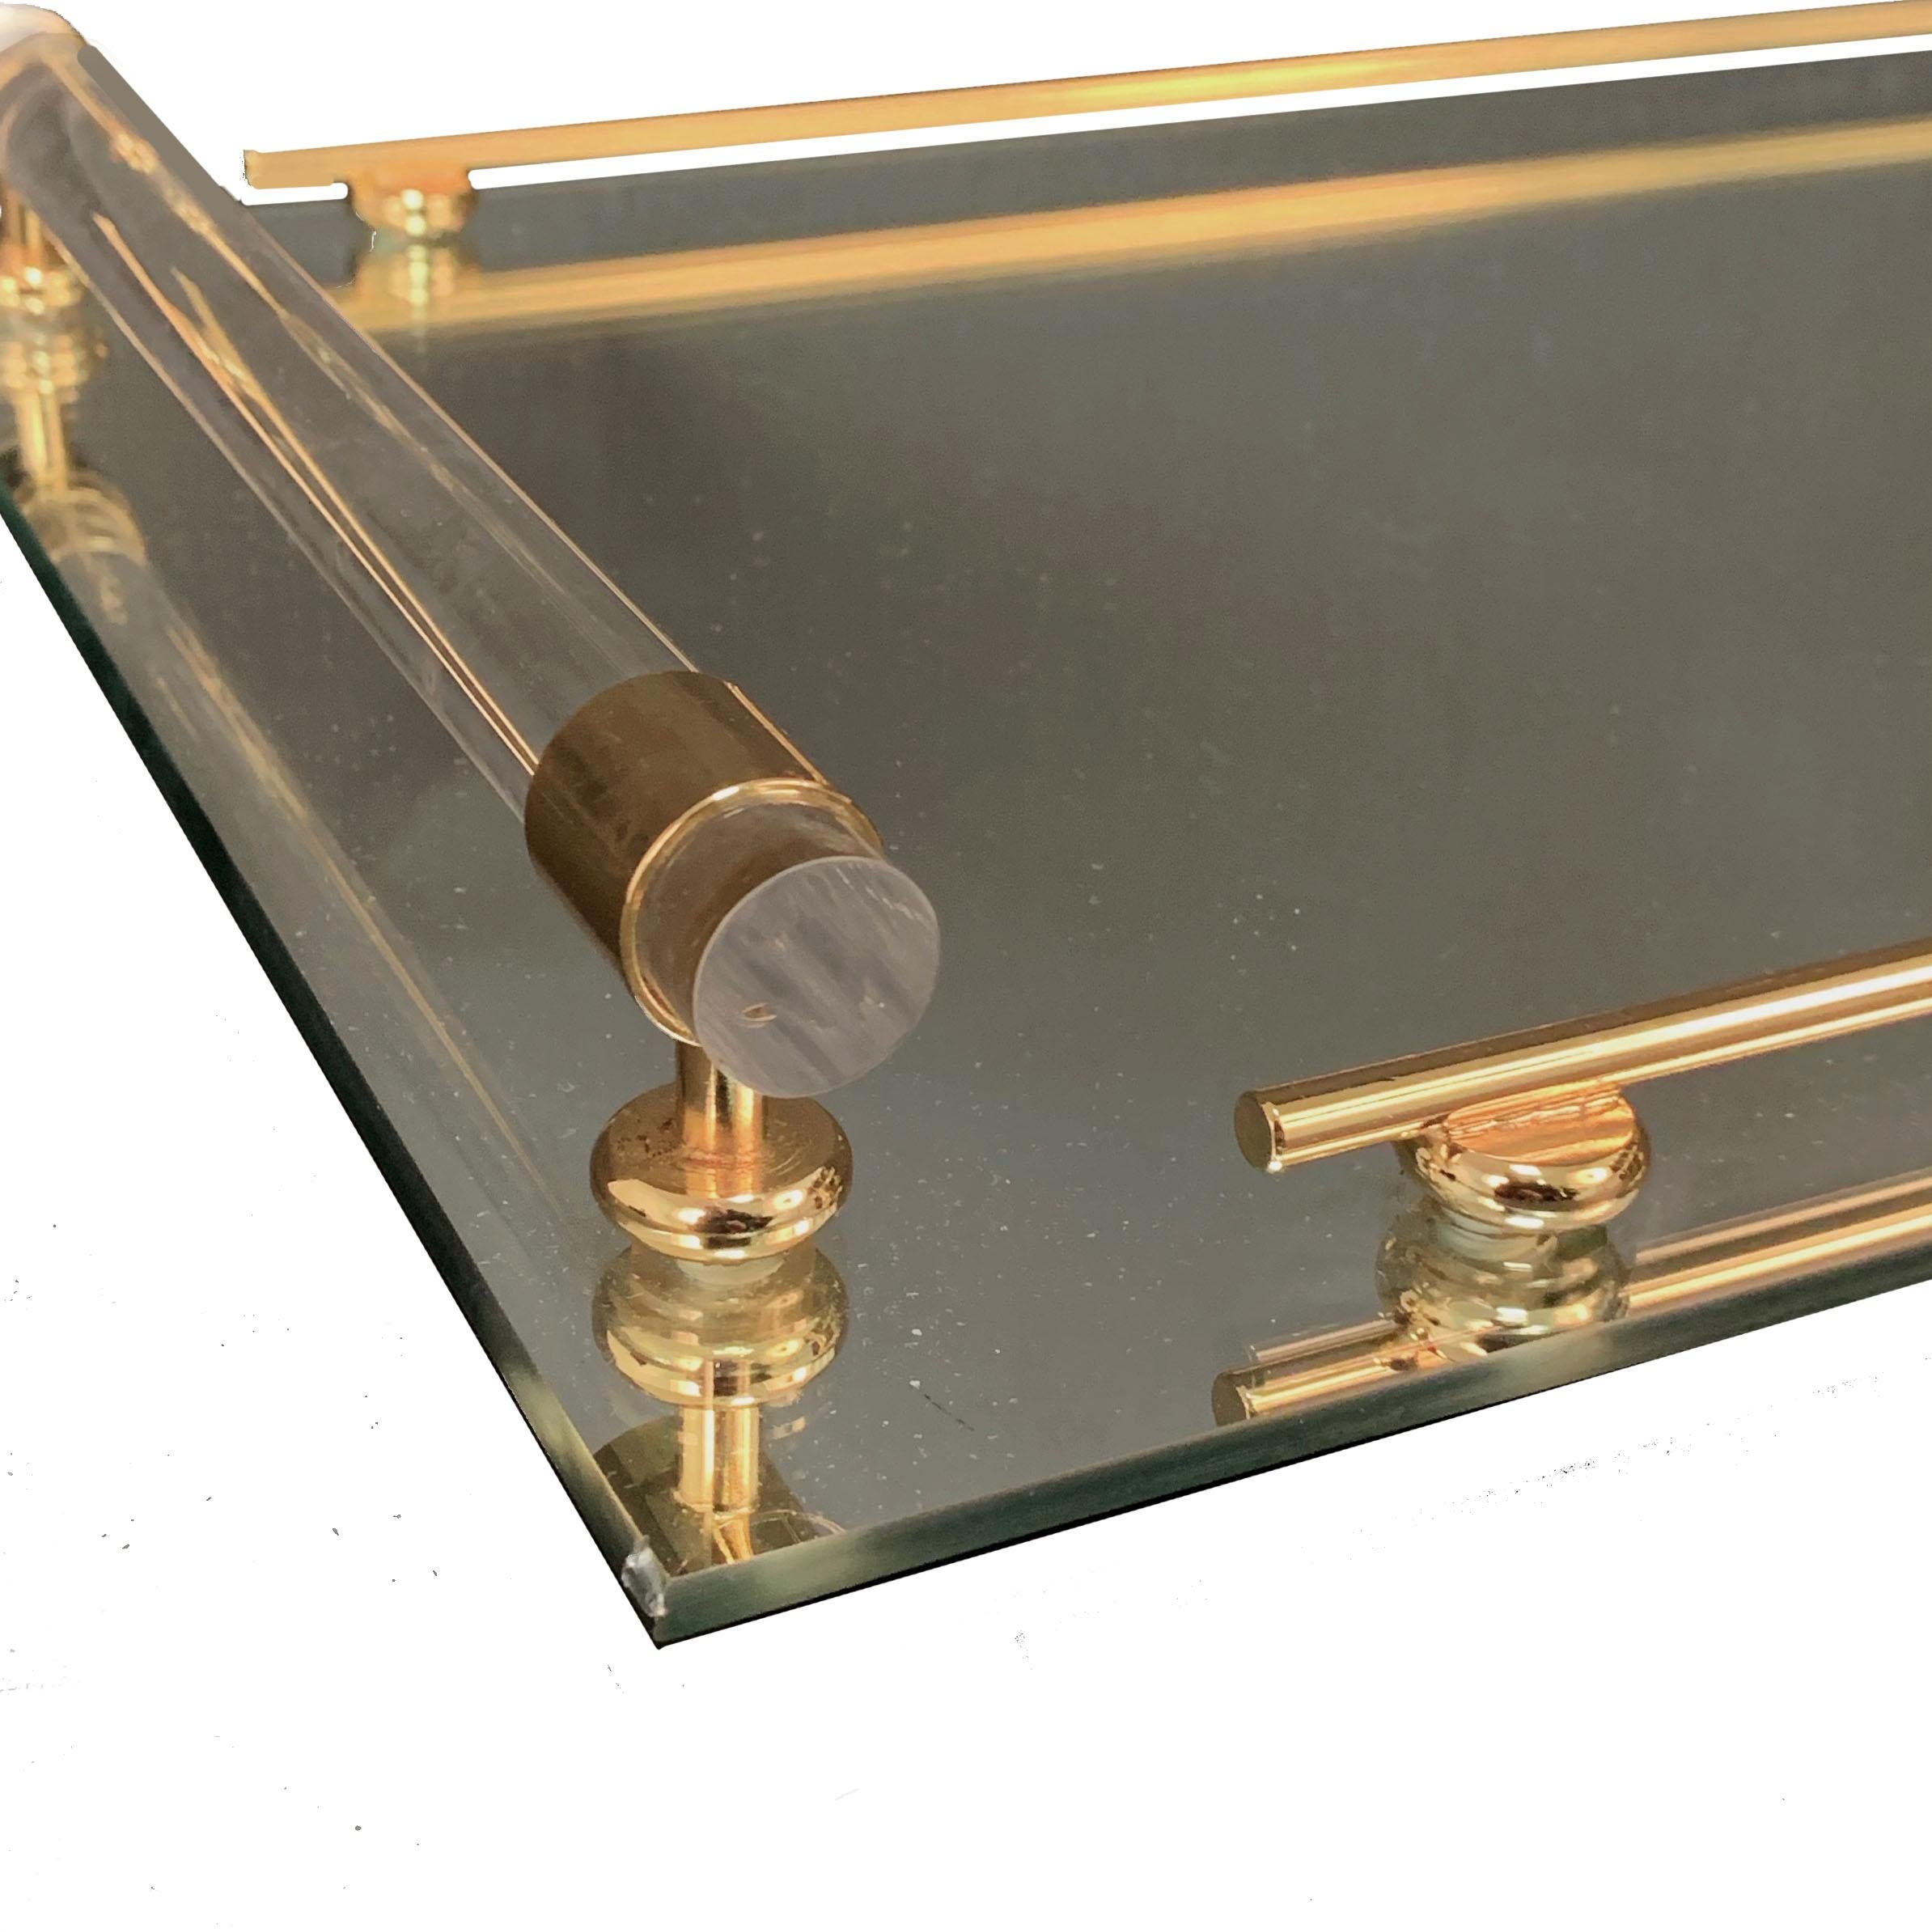 Modern Tray with Mirror and Lucite, Brass 24-Karat Gold-Plated, Milano, Italy, 1980s